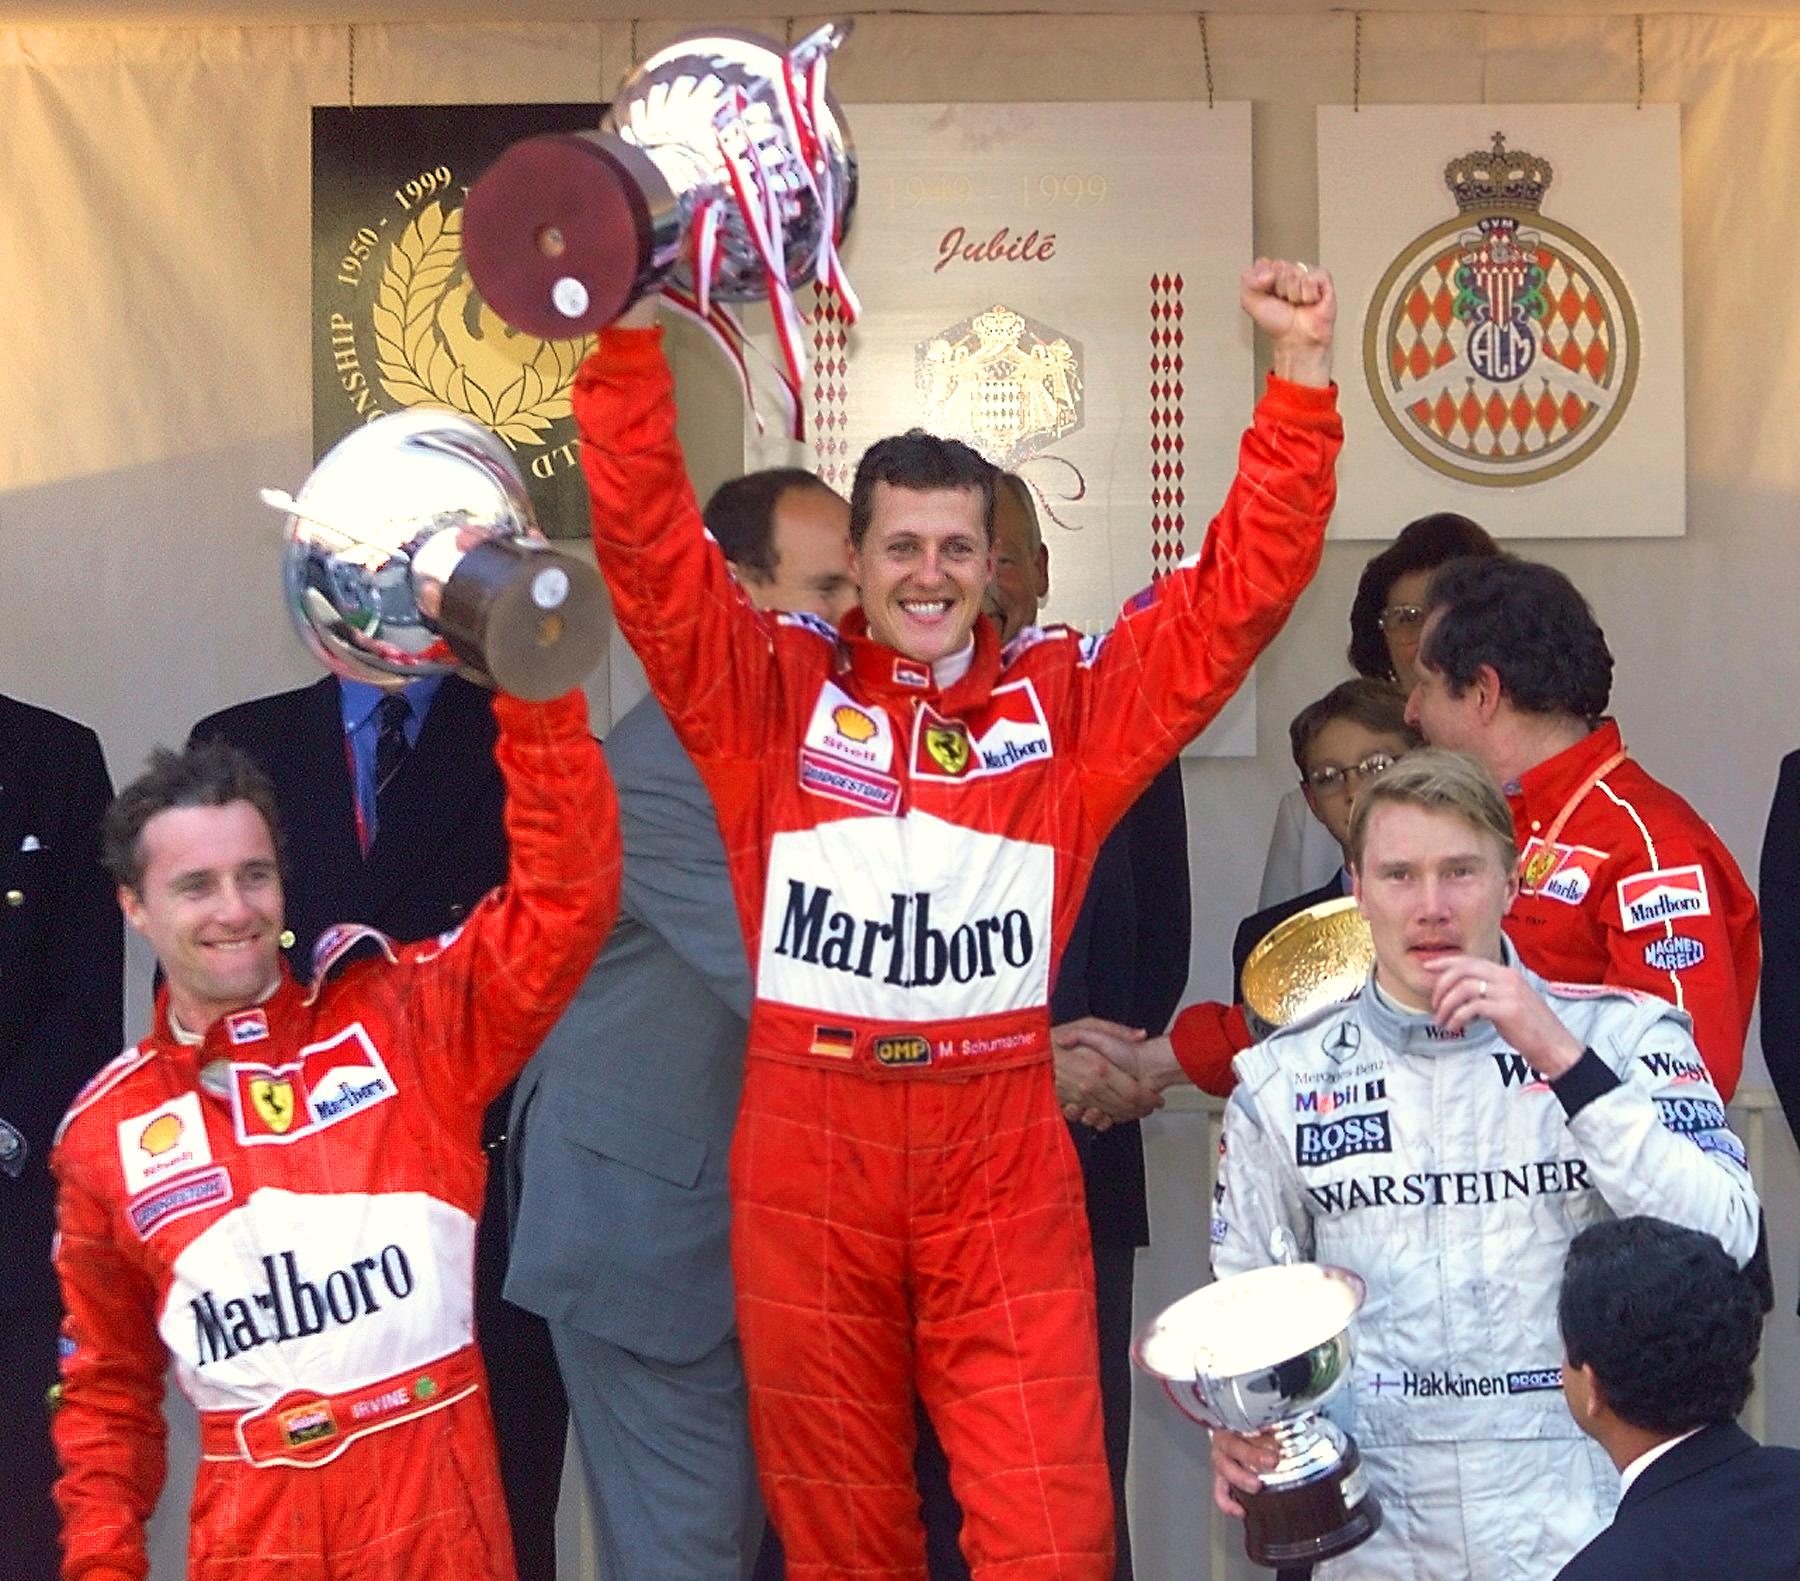 Former F1 ace Michael Schumacher celebrating his 1999 Championship victory with Ferrari